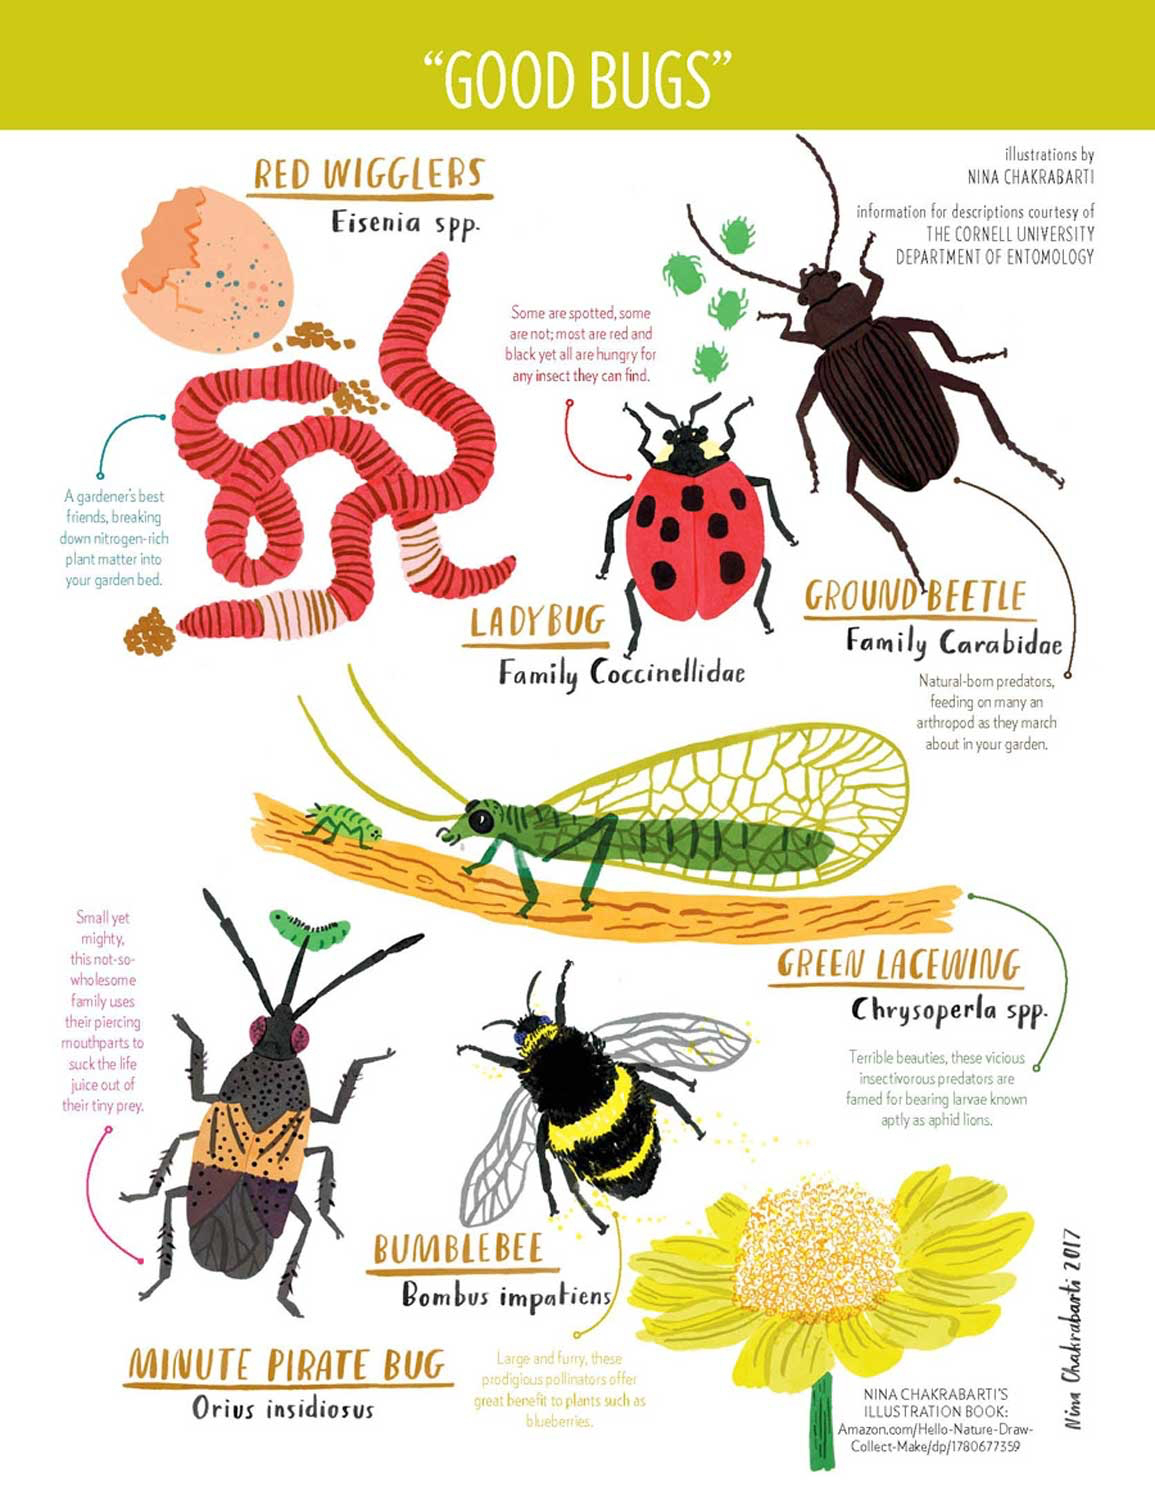 10 beneficial insects you want in the garden